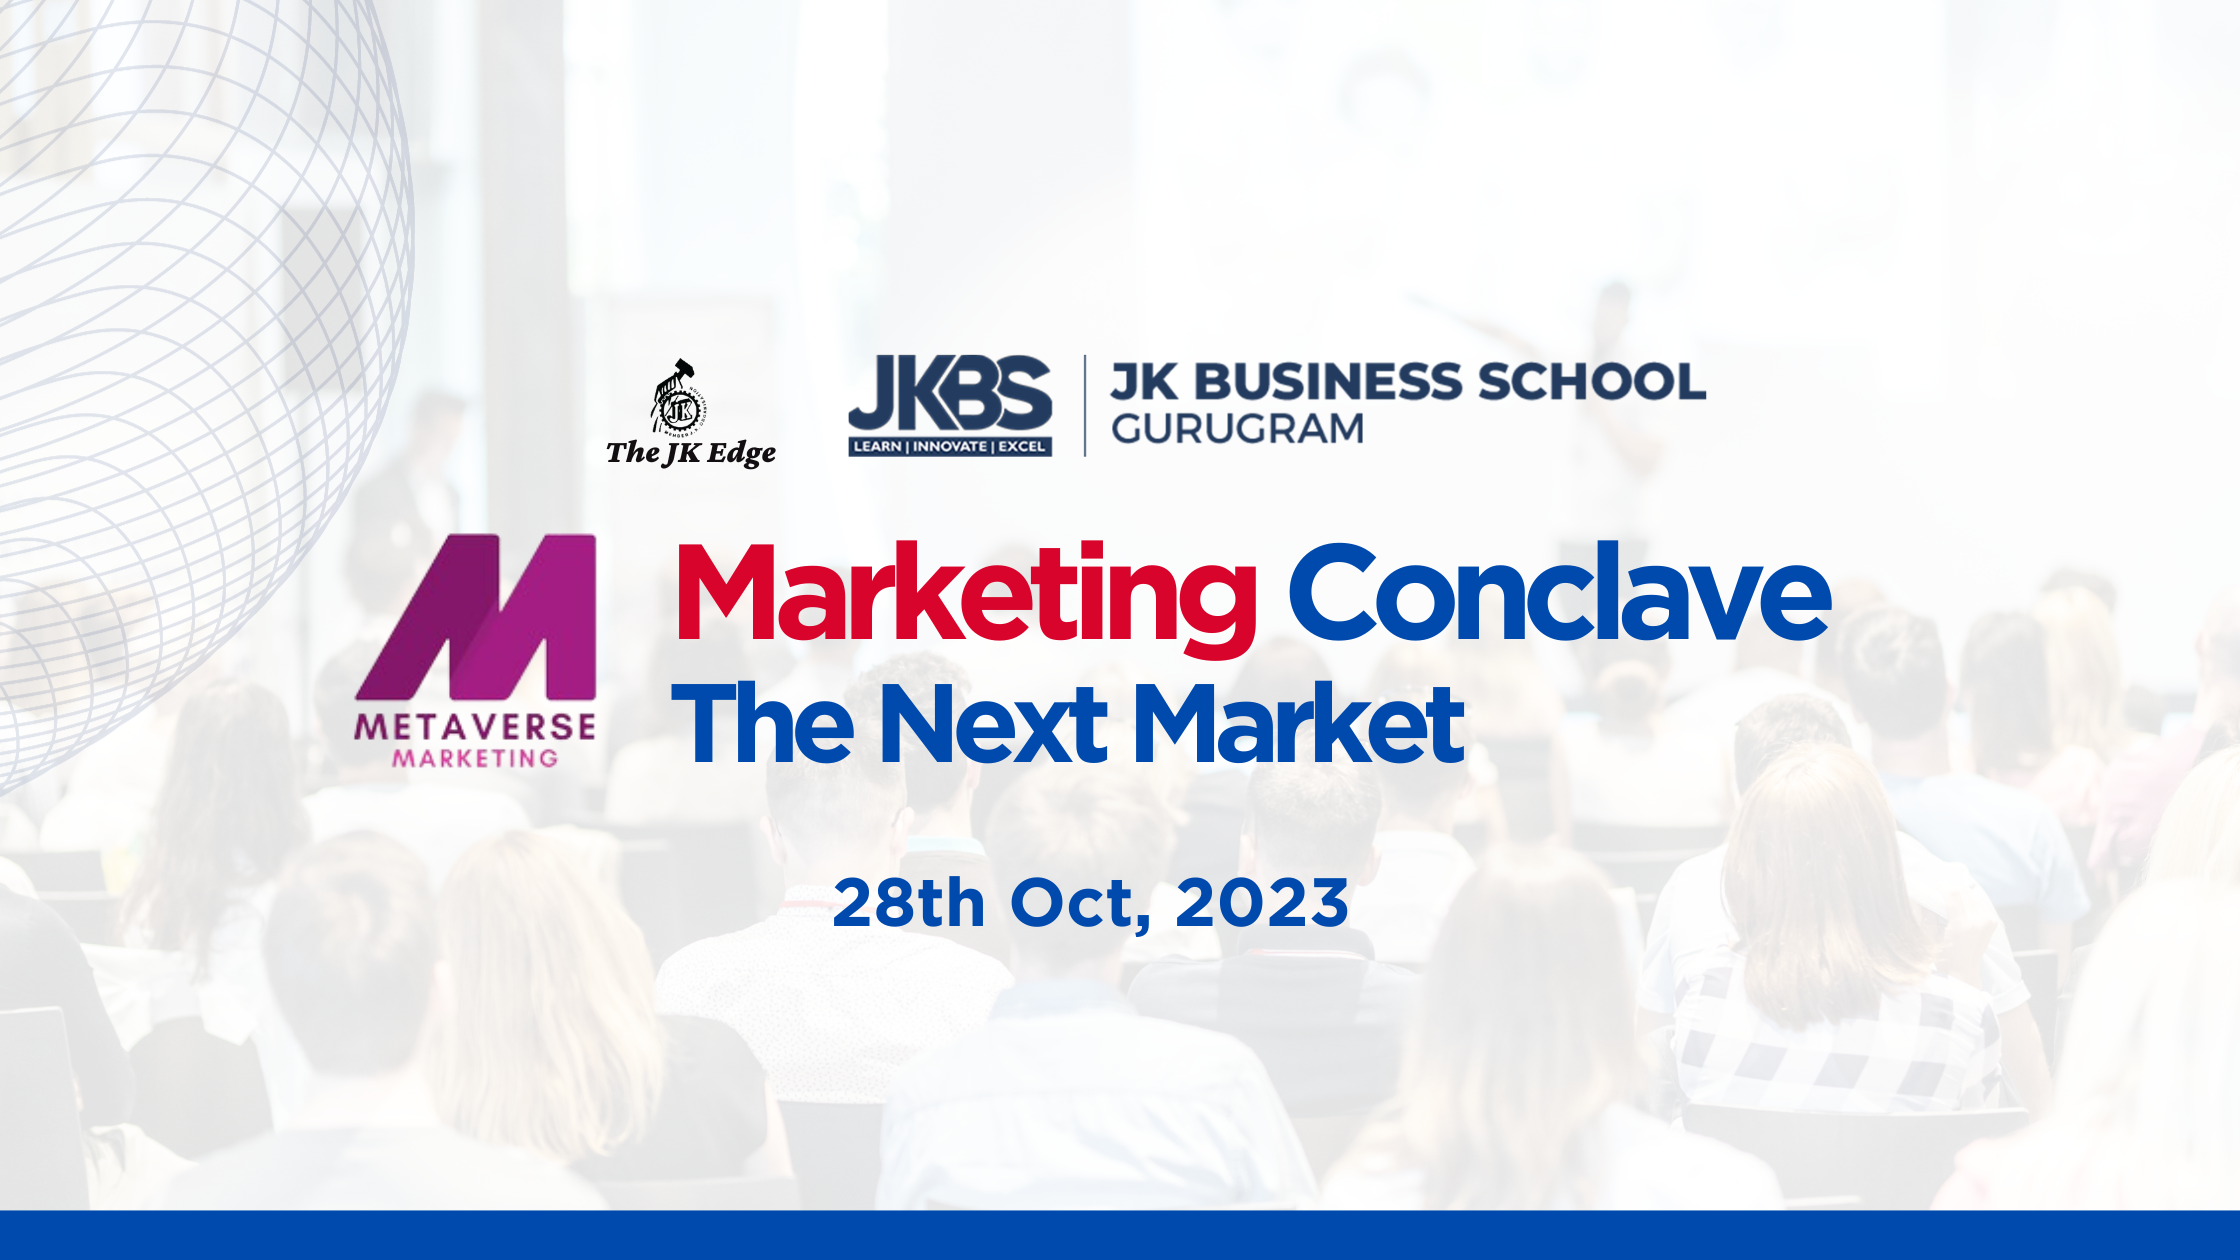 “The Next Market” Marketing Conclave at JK Business School: A Testament to Excellence in Business Education